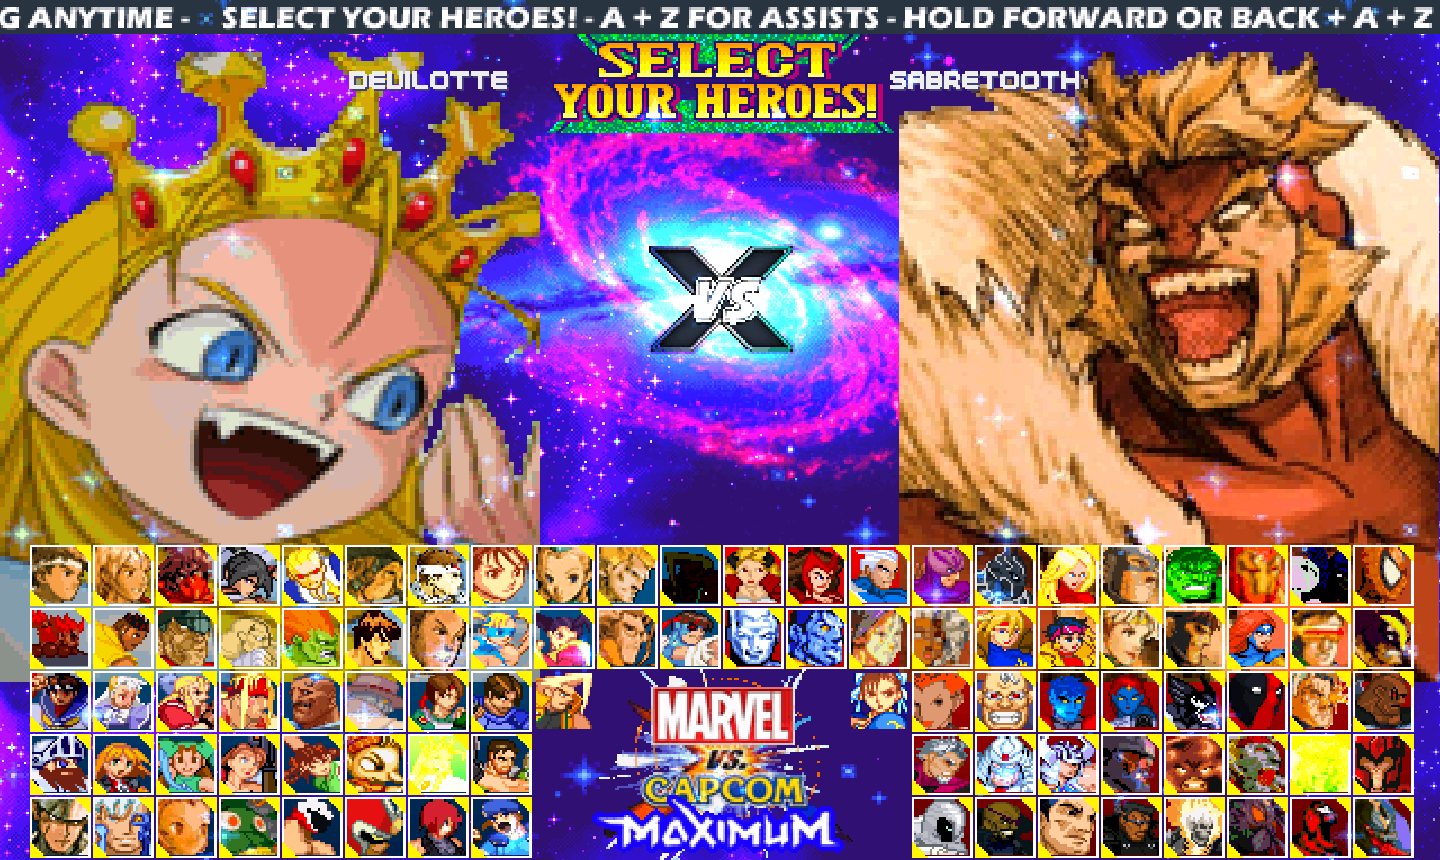 Marvel vs. Capcom Maximum by Pizzahighfive [OLD VERSION] (with the add004's Tag) [UPDATED UNTIL CHAR MvC_AlphaChun-Li IN 04-12-20]-RAMON GARCIA